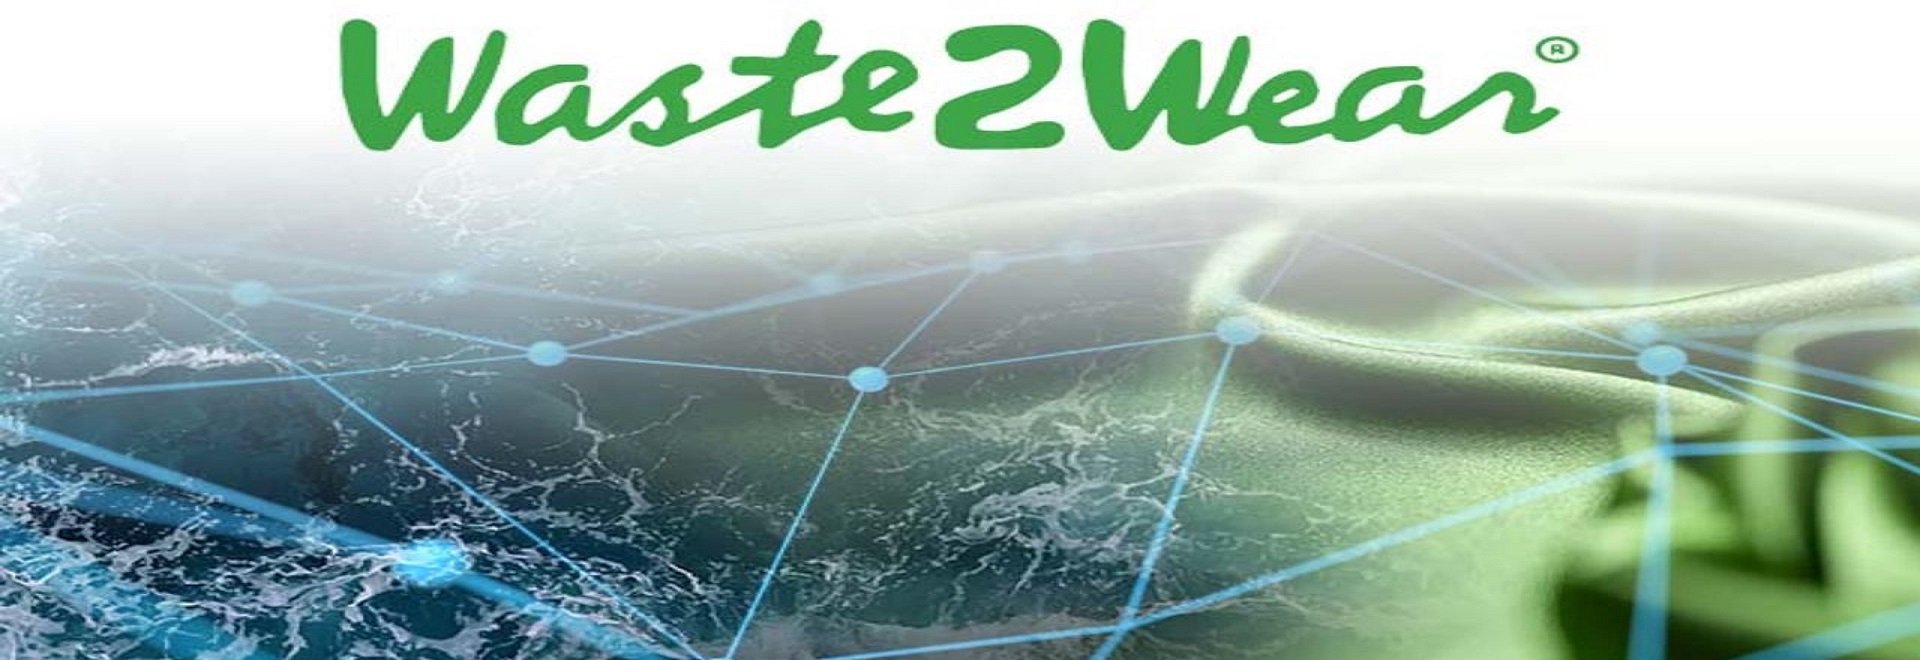 Waste2Wear Is Using The Blockchain To Turn Ocean Plastic Waste Into Clothes 1280x720 - اخبار چهارشنبه مورخ 98/6/27